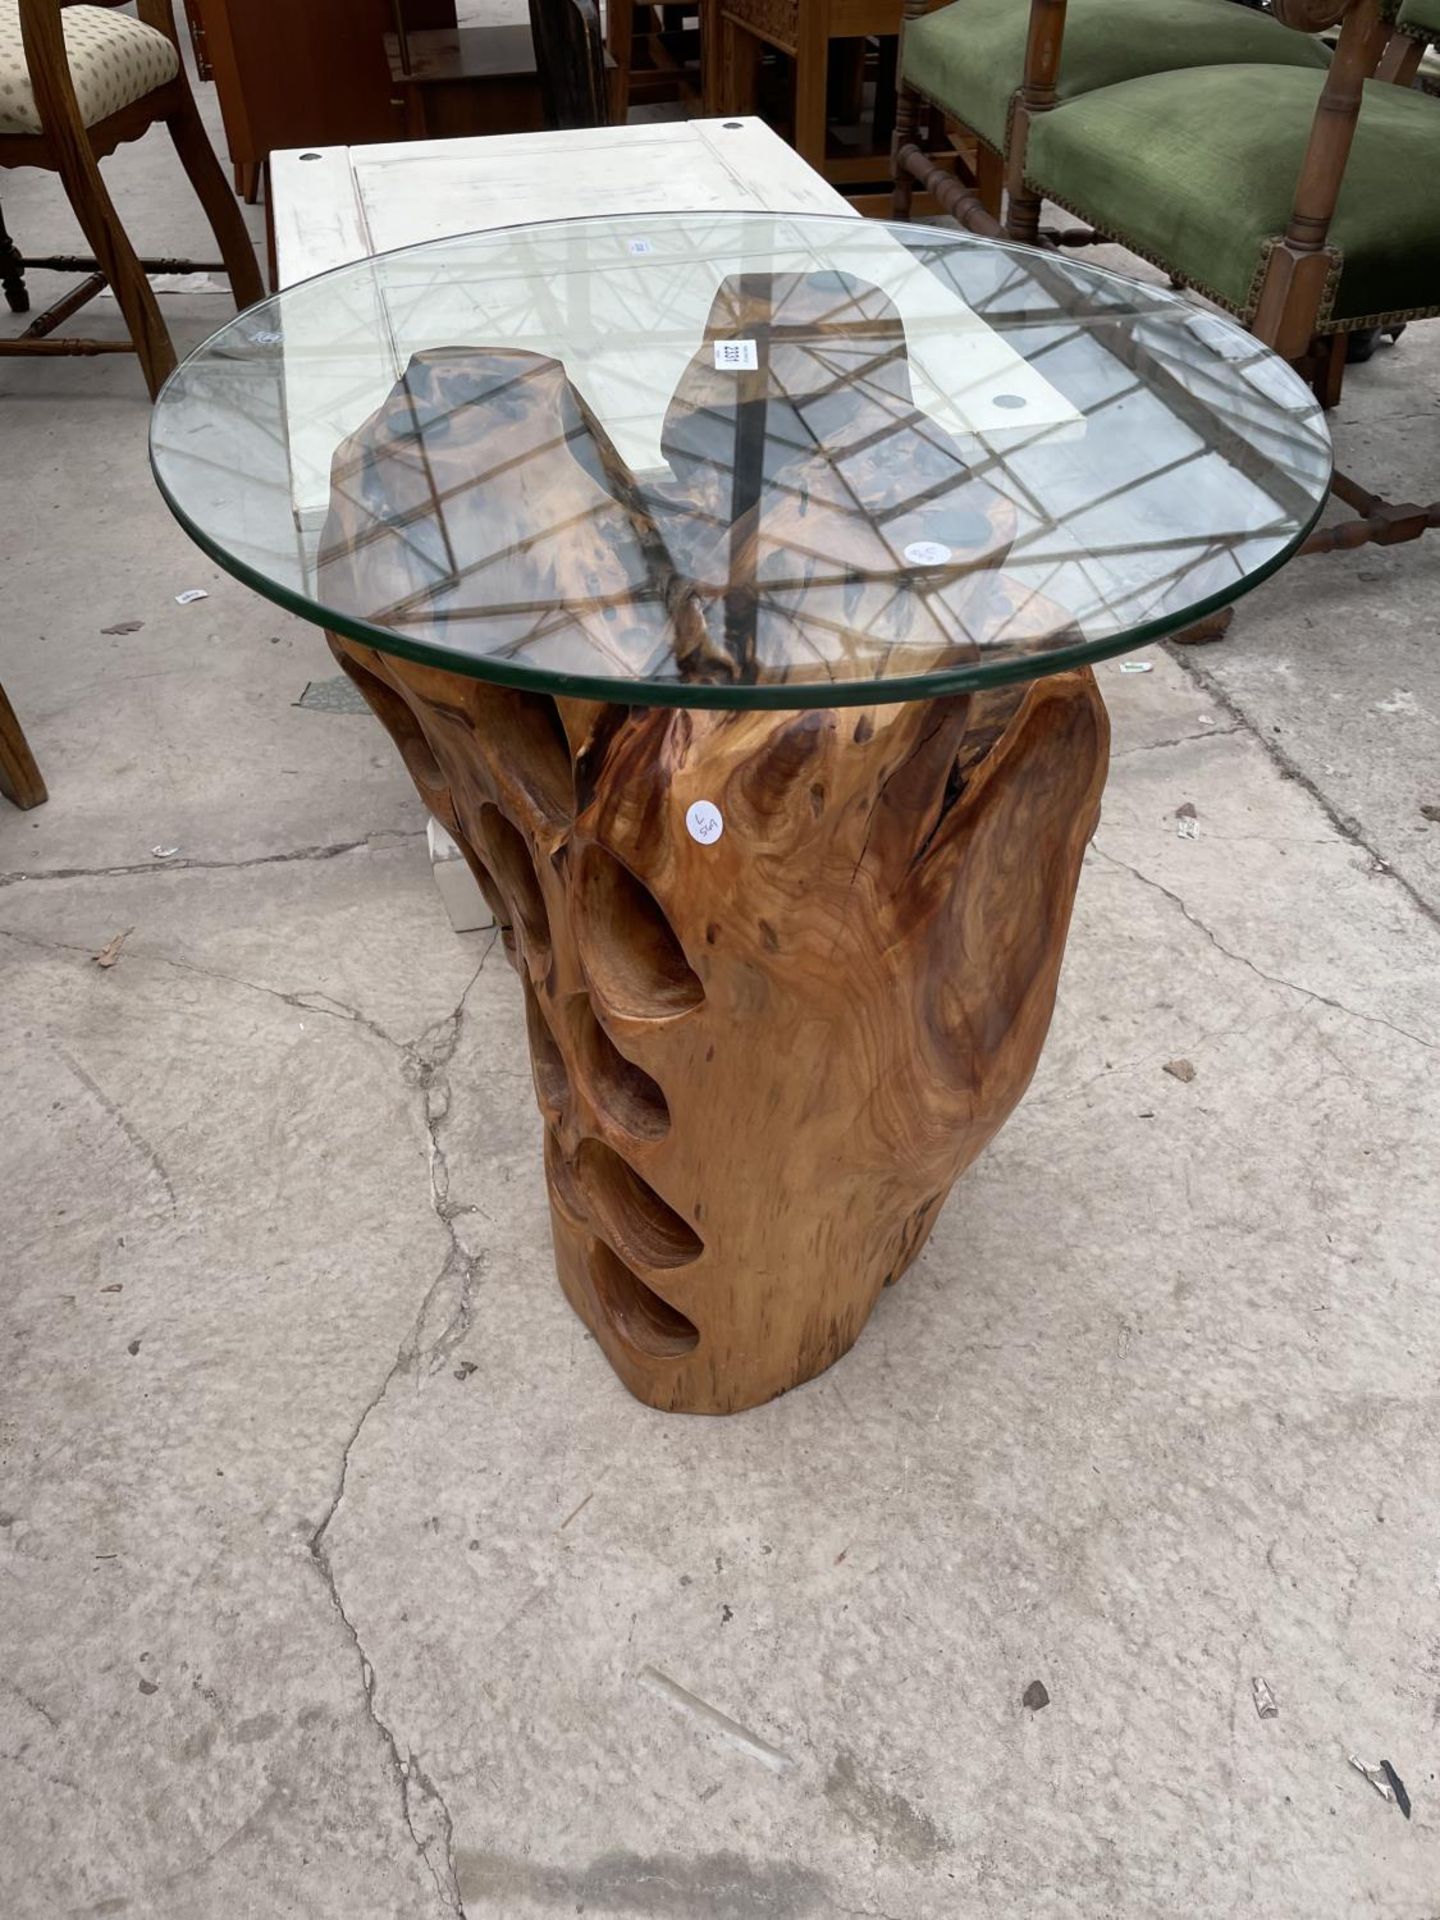 A WINE TABLE WITH GLASS TOP, MADE FROM A LARGE TREE ROOT INCORPORATING A 12 BOTTLE WINE HOLDER,